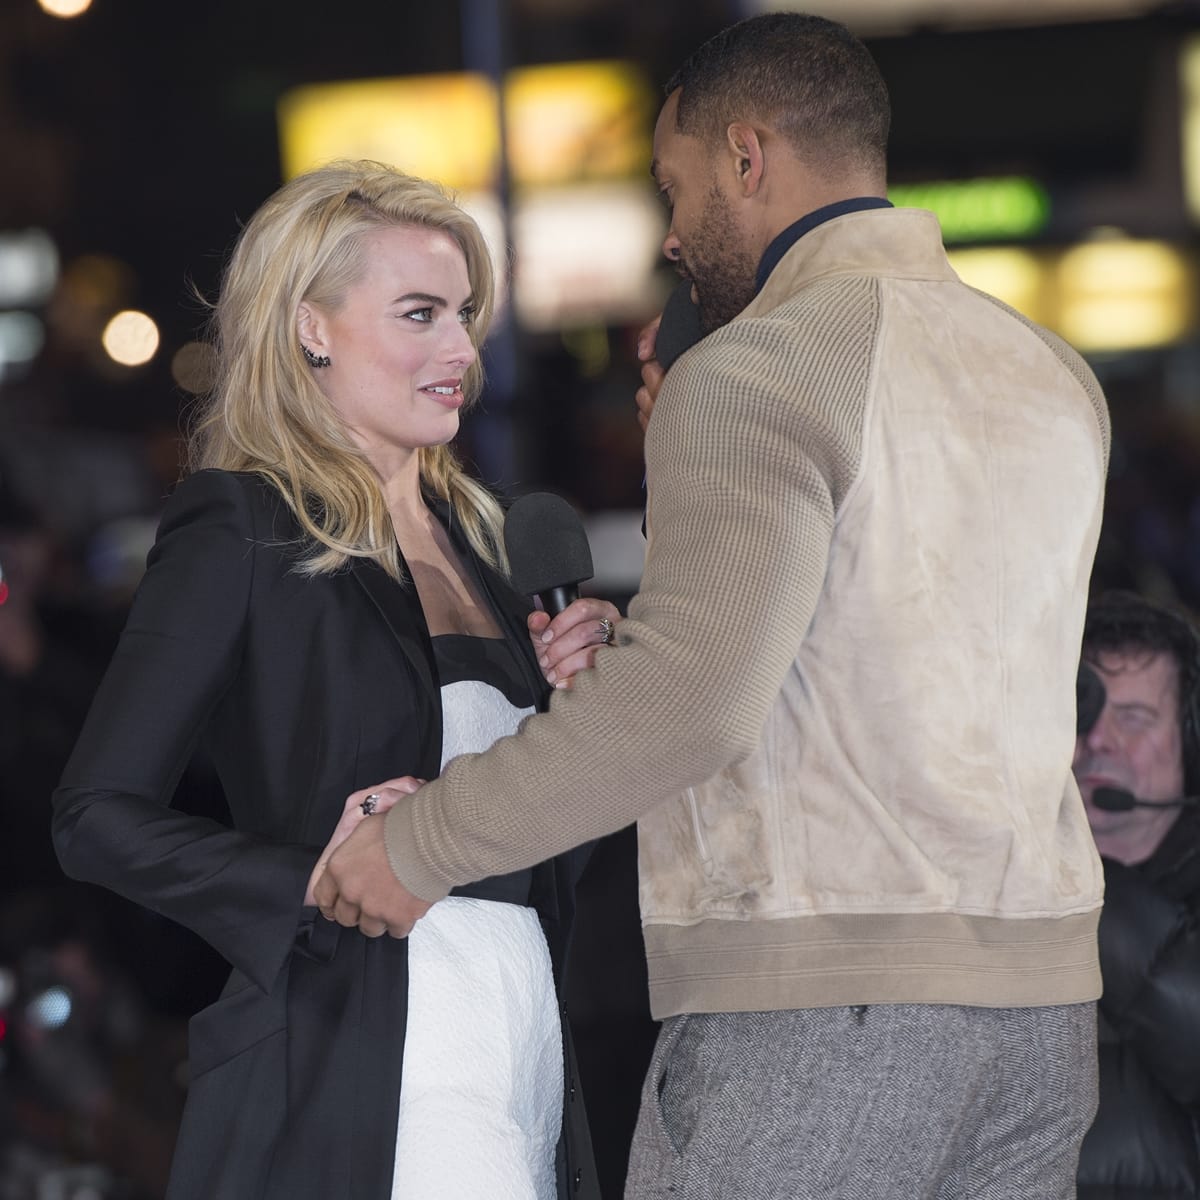 Margot Robbie and Will Smith have been rumored to be more than just co-stars